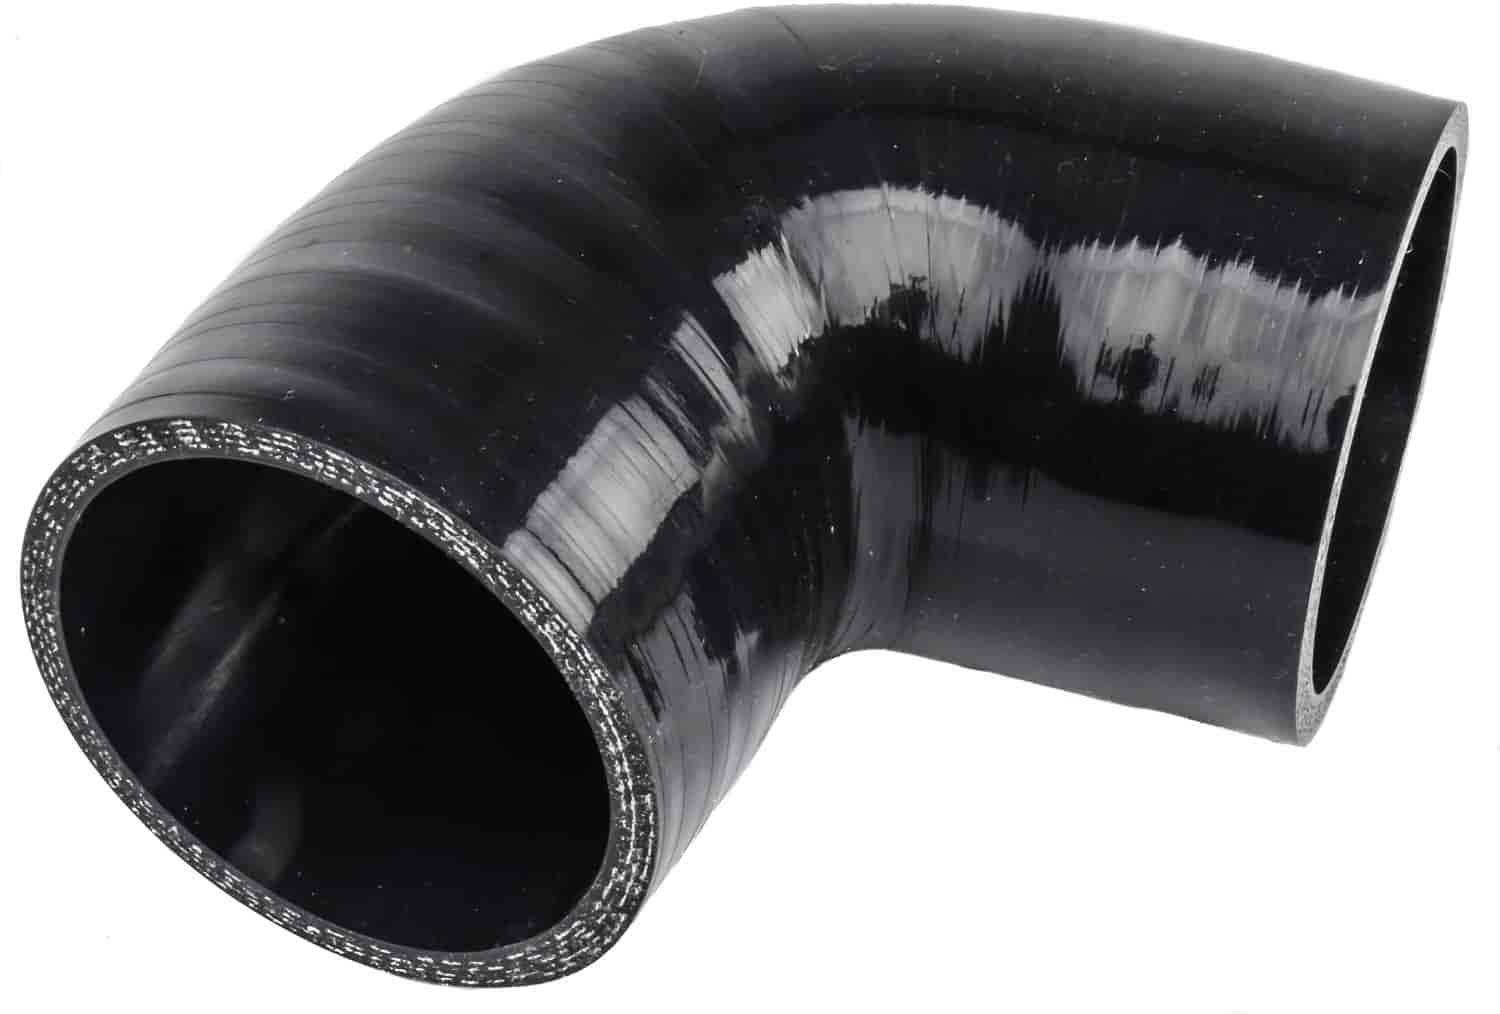 JEGS 56022: 90 Degree Silicone Hose Connector 3 I.D. x 4 Long - JEGS